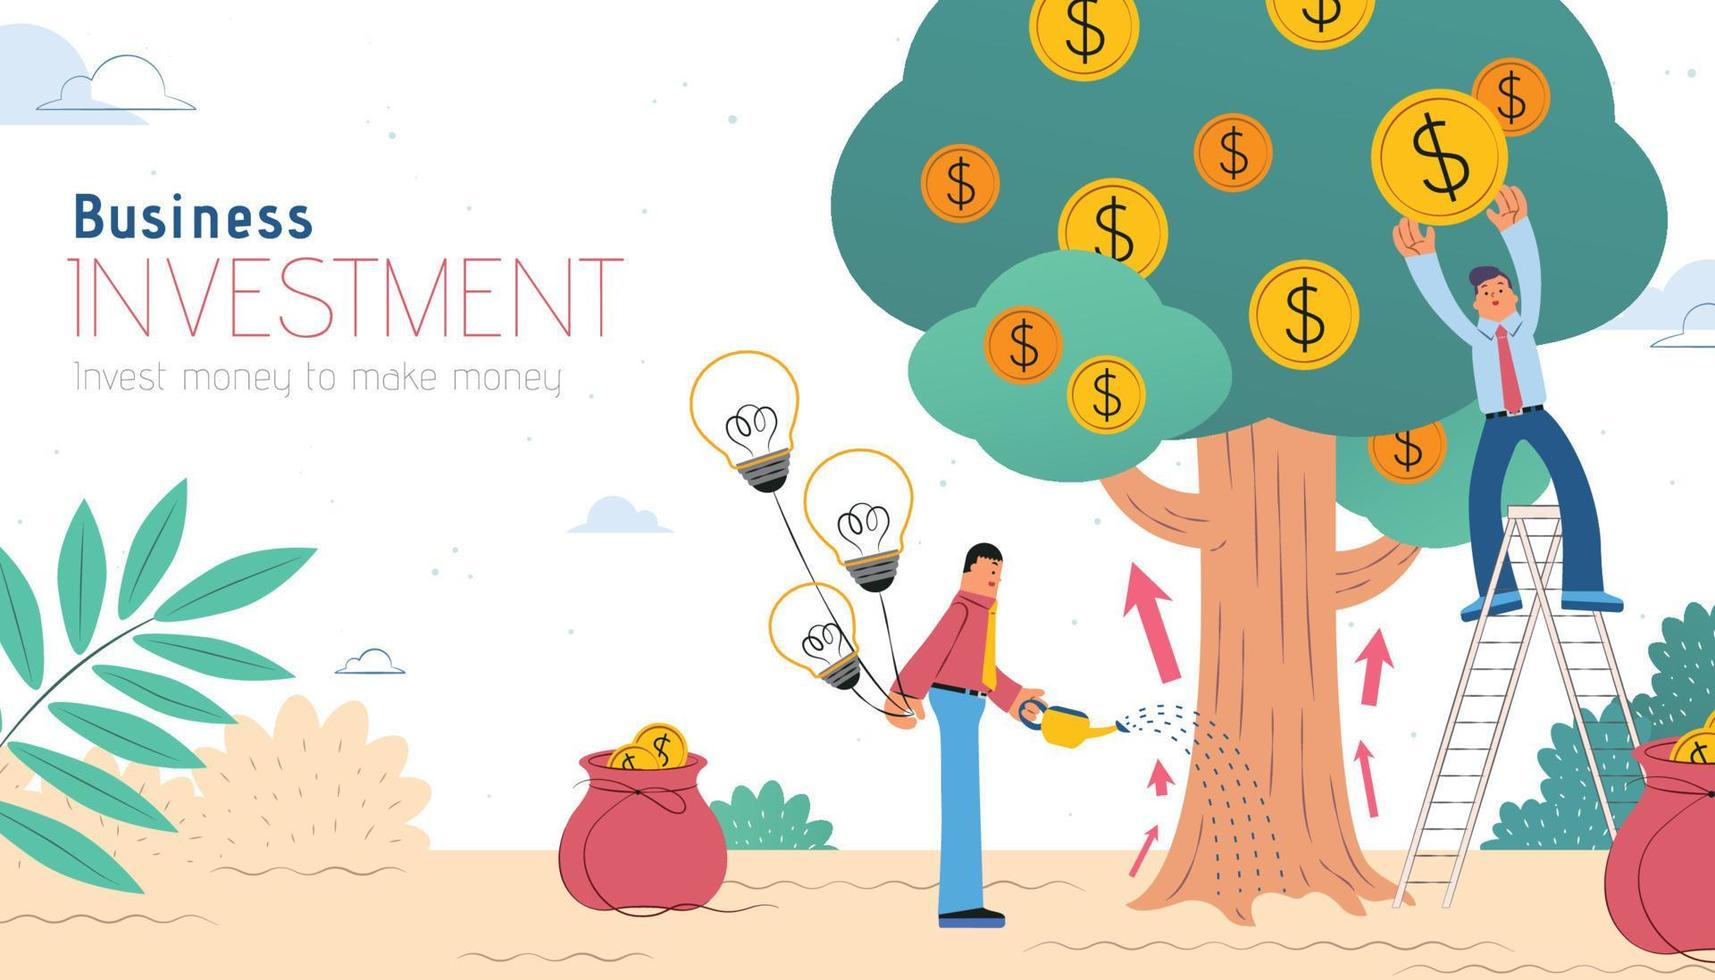 Business investment concept flat design, businessmen watering money tree and get coins from it, revenue and income metaphor illustration vector